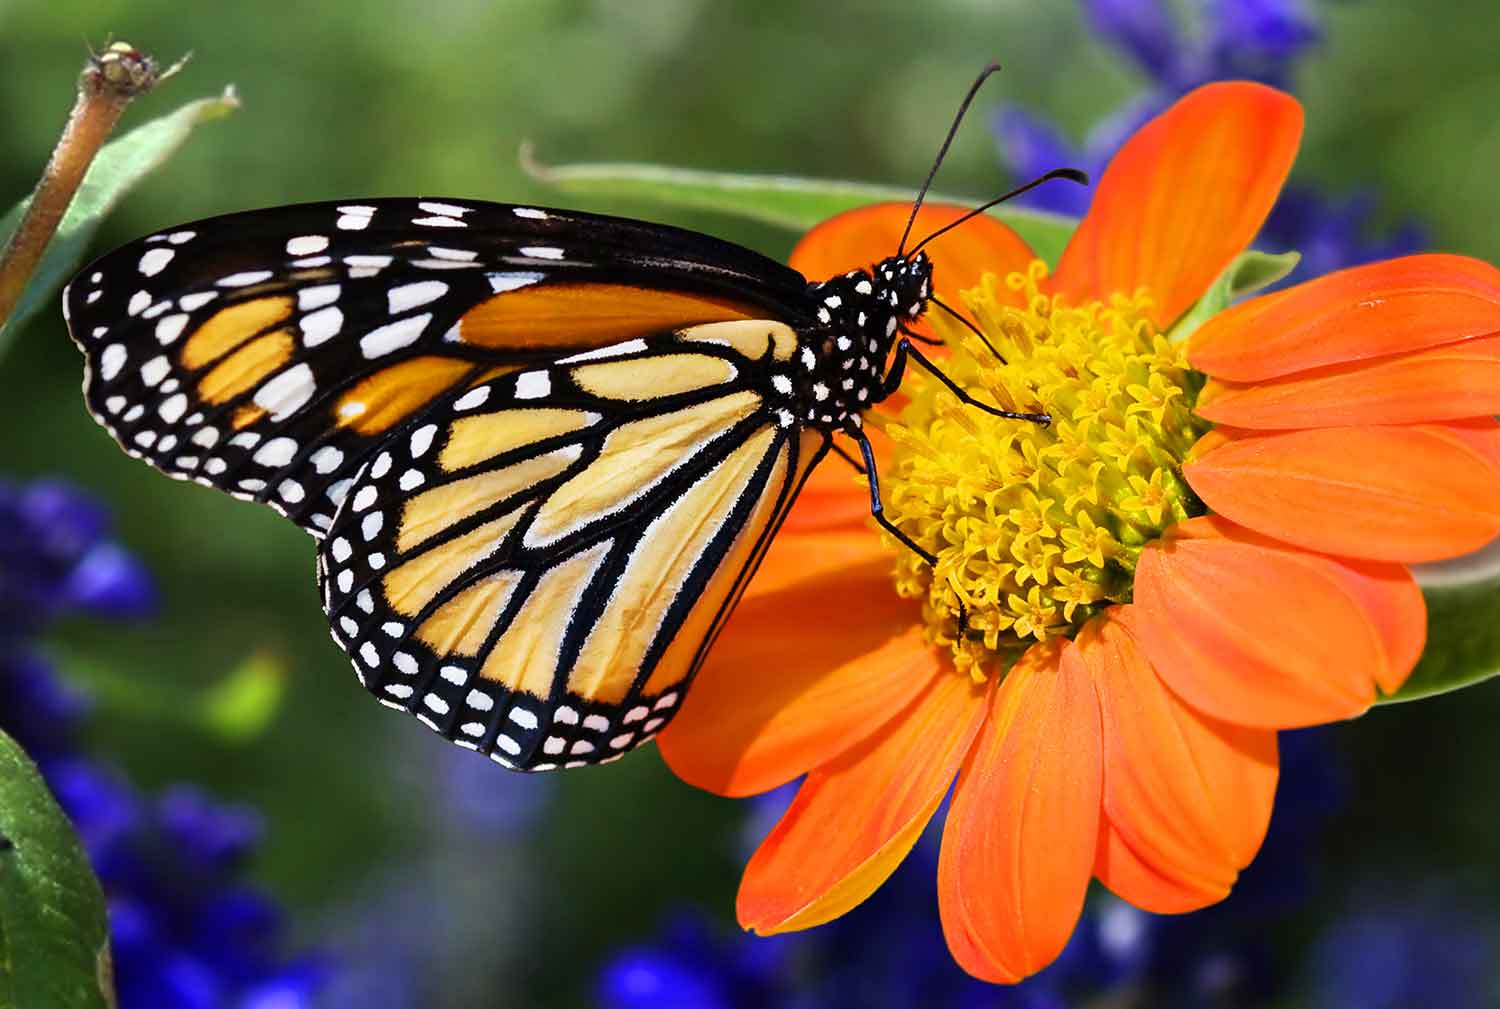 A profile of a monarch butterfly on an orange and yellow flower.